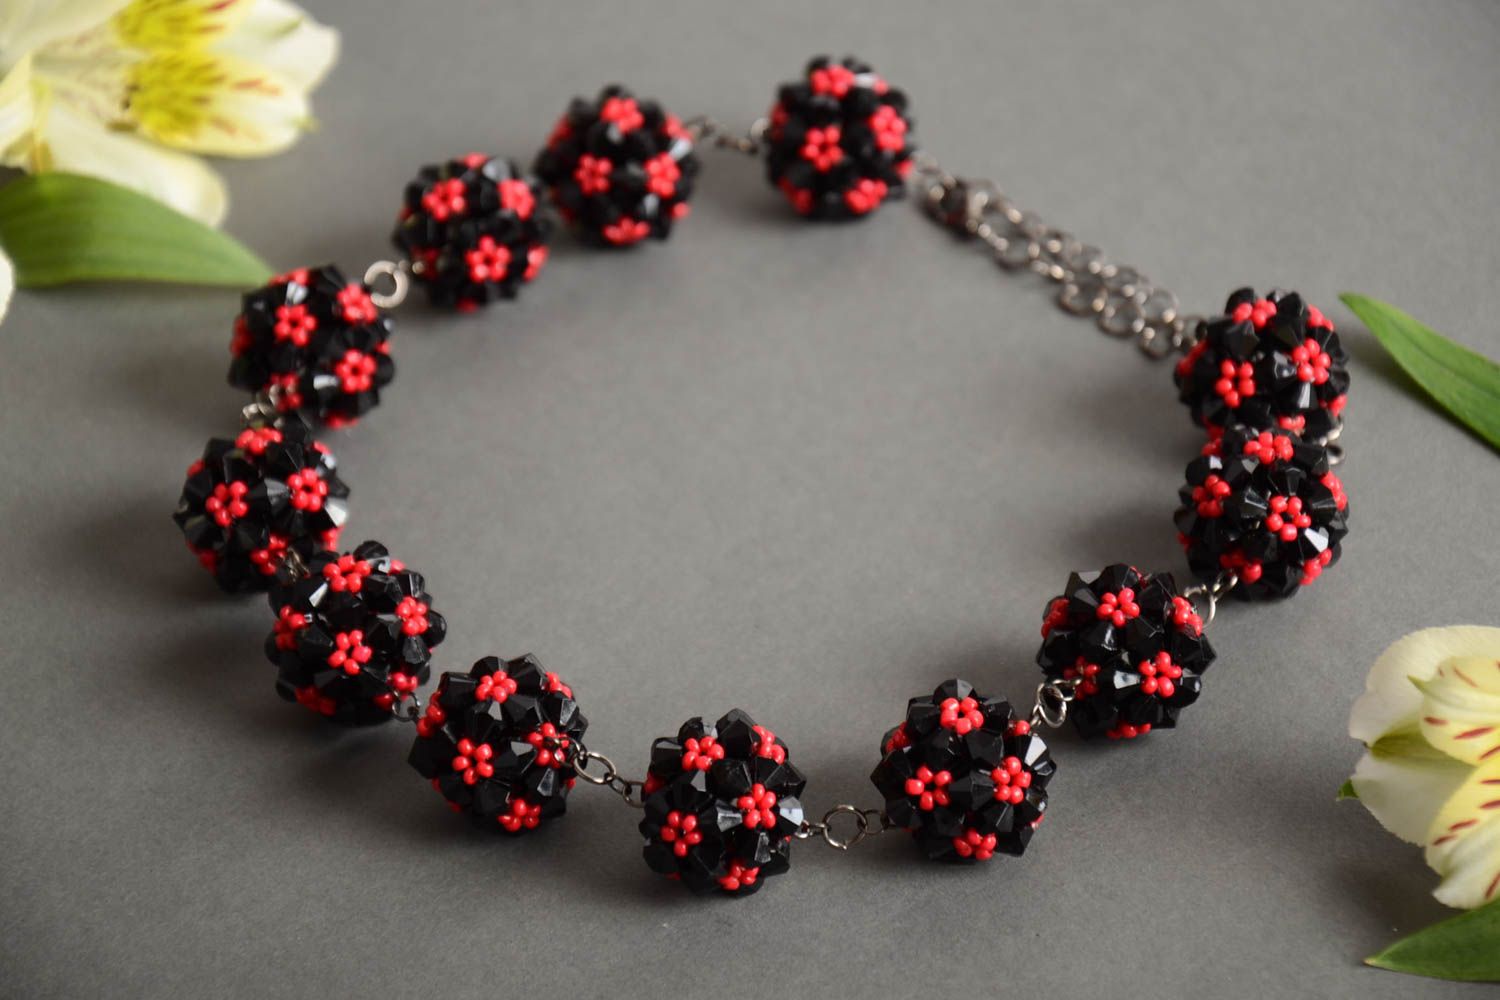 Handmade designer women's necklace crocheted of red and black Czech beads photo 1